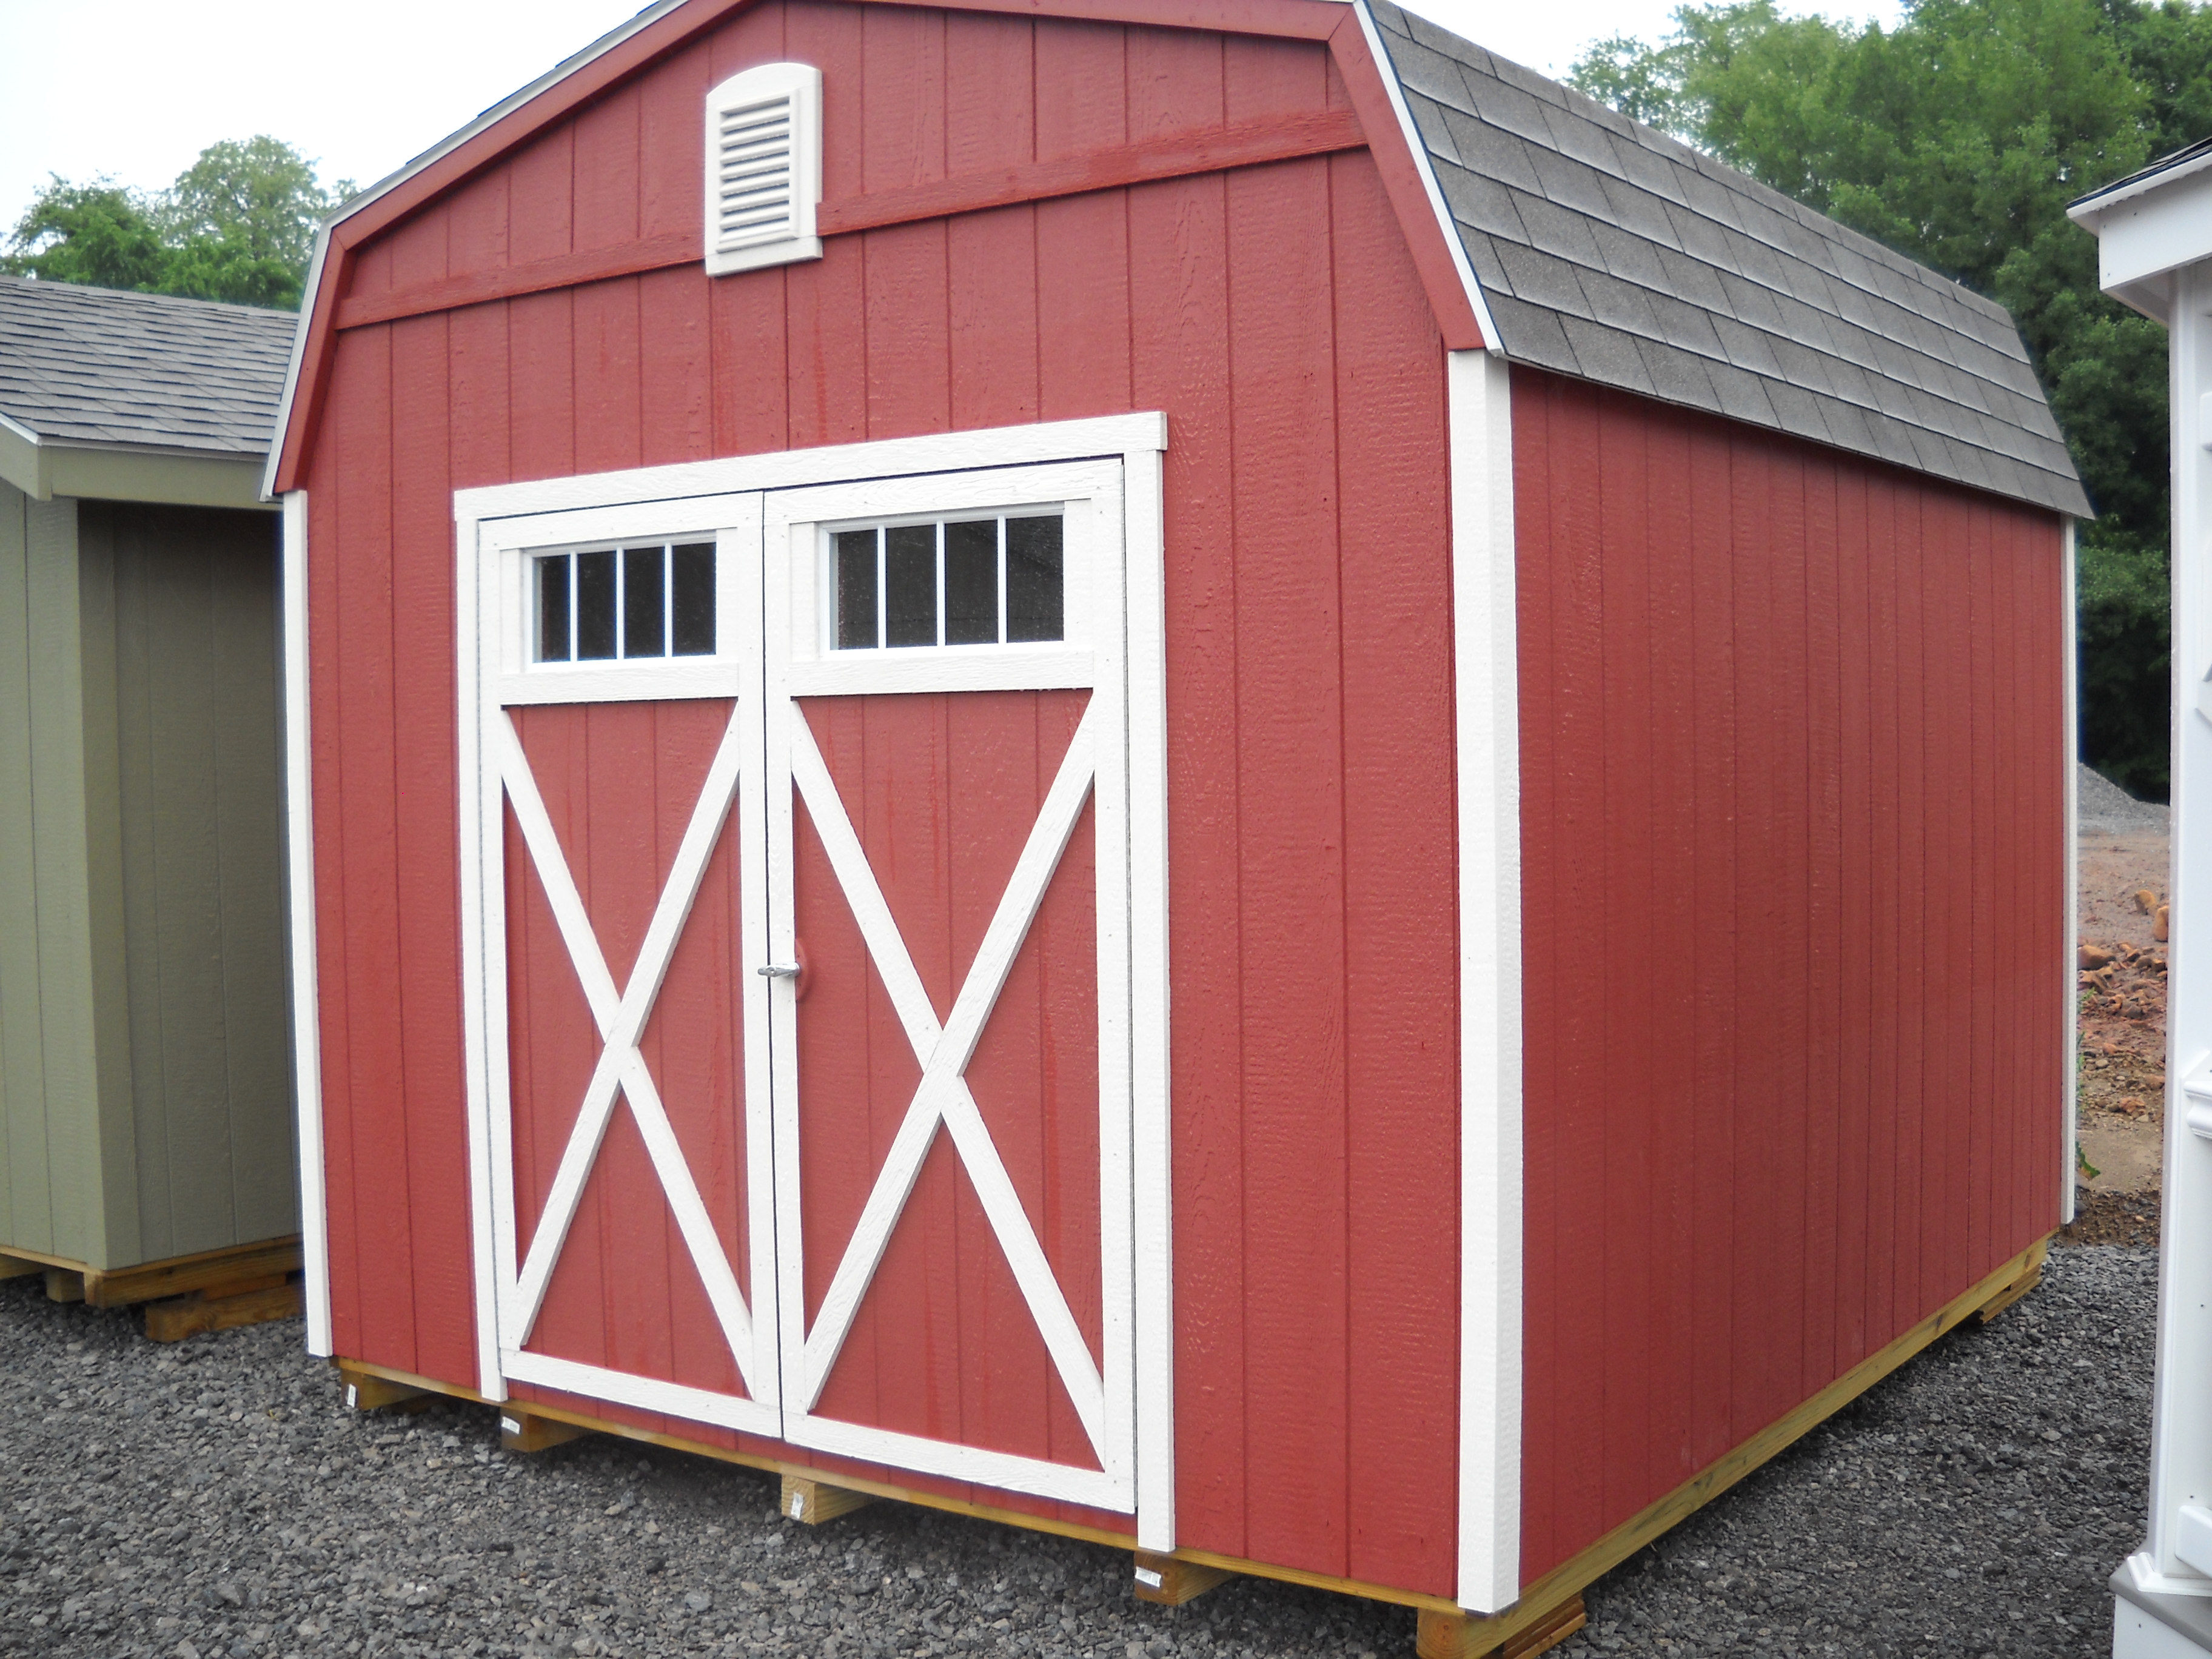  storage shed in store price $ 2498 00 barn style storage sheds for